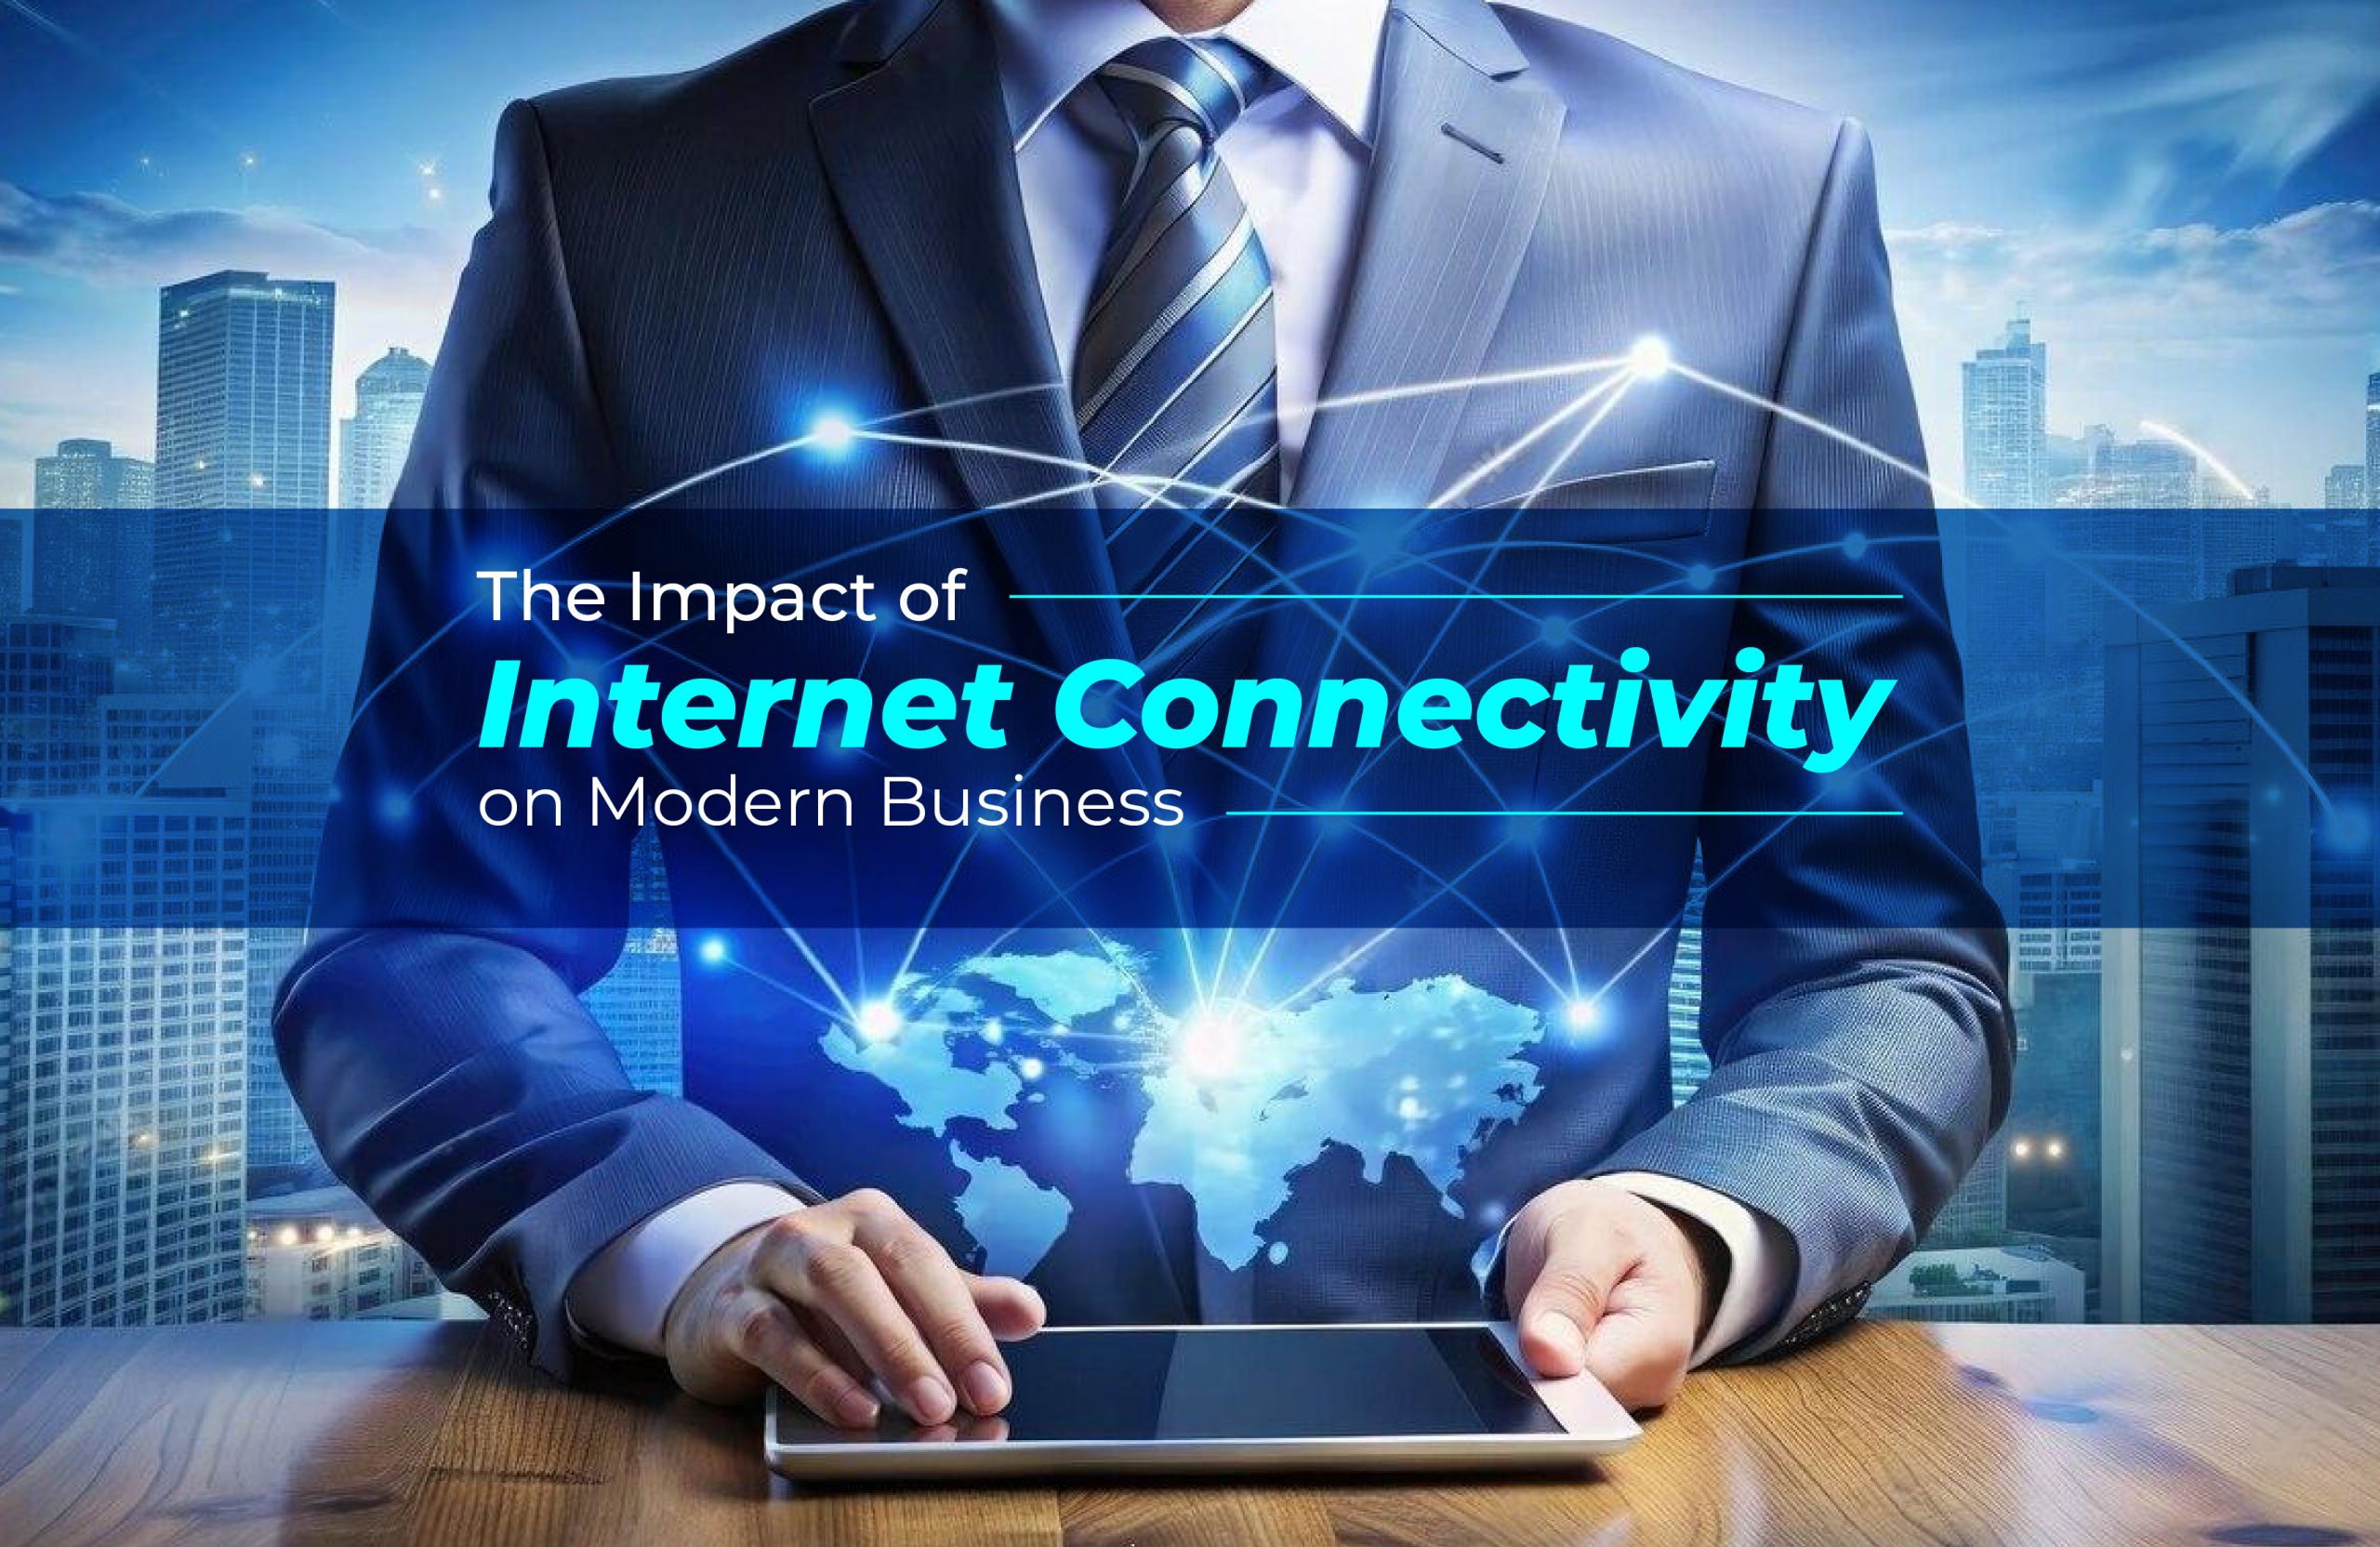 The Impact of Internet Connectivity on Modern Business